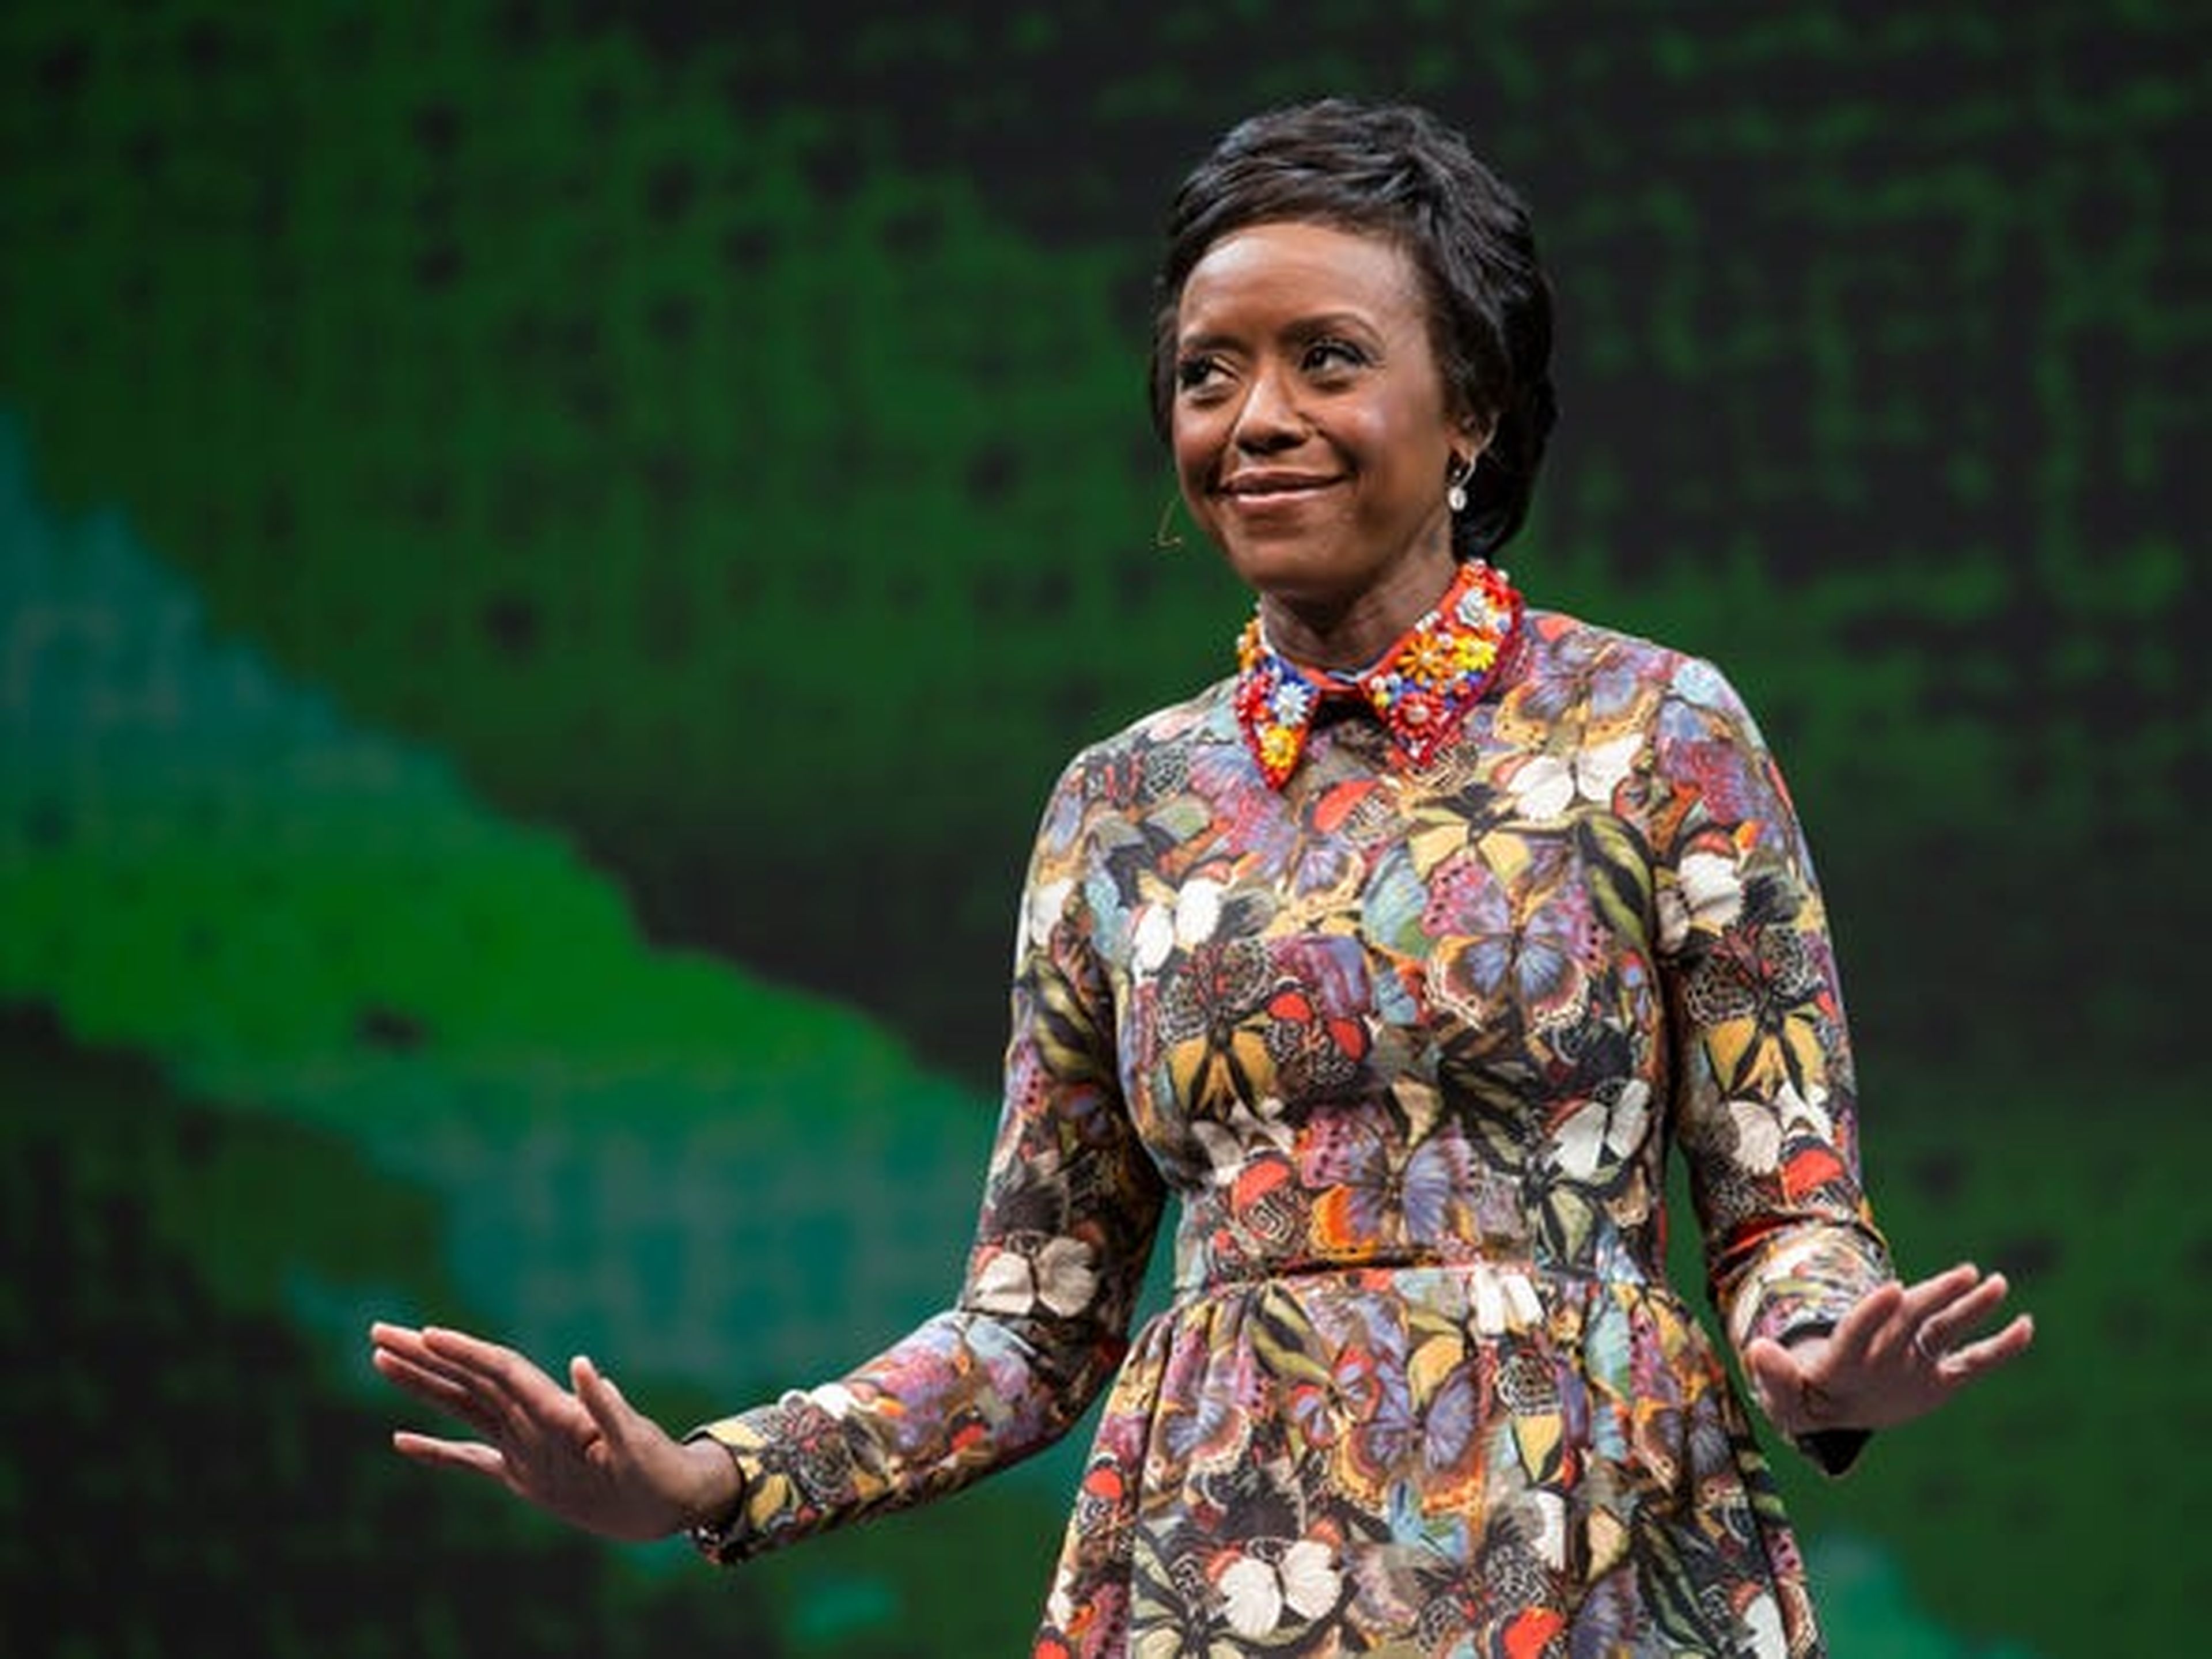 Mellody Hobson, co-CEO, Ariel Investments